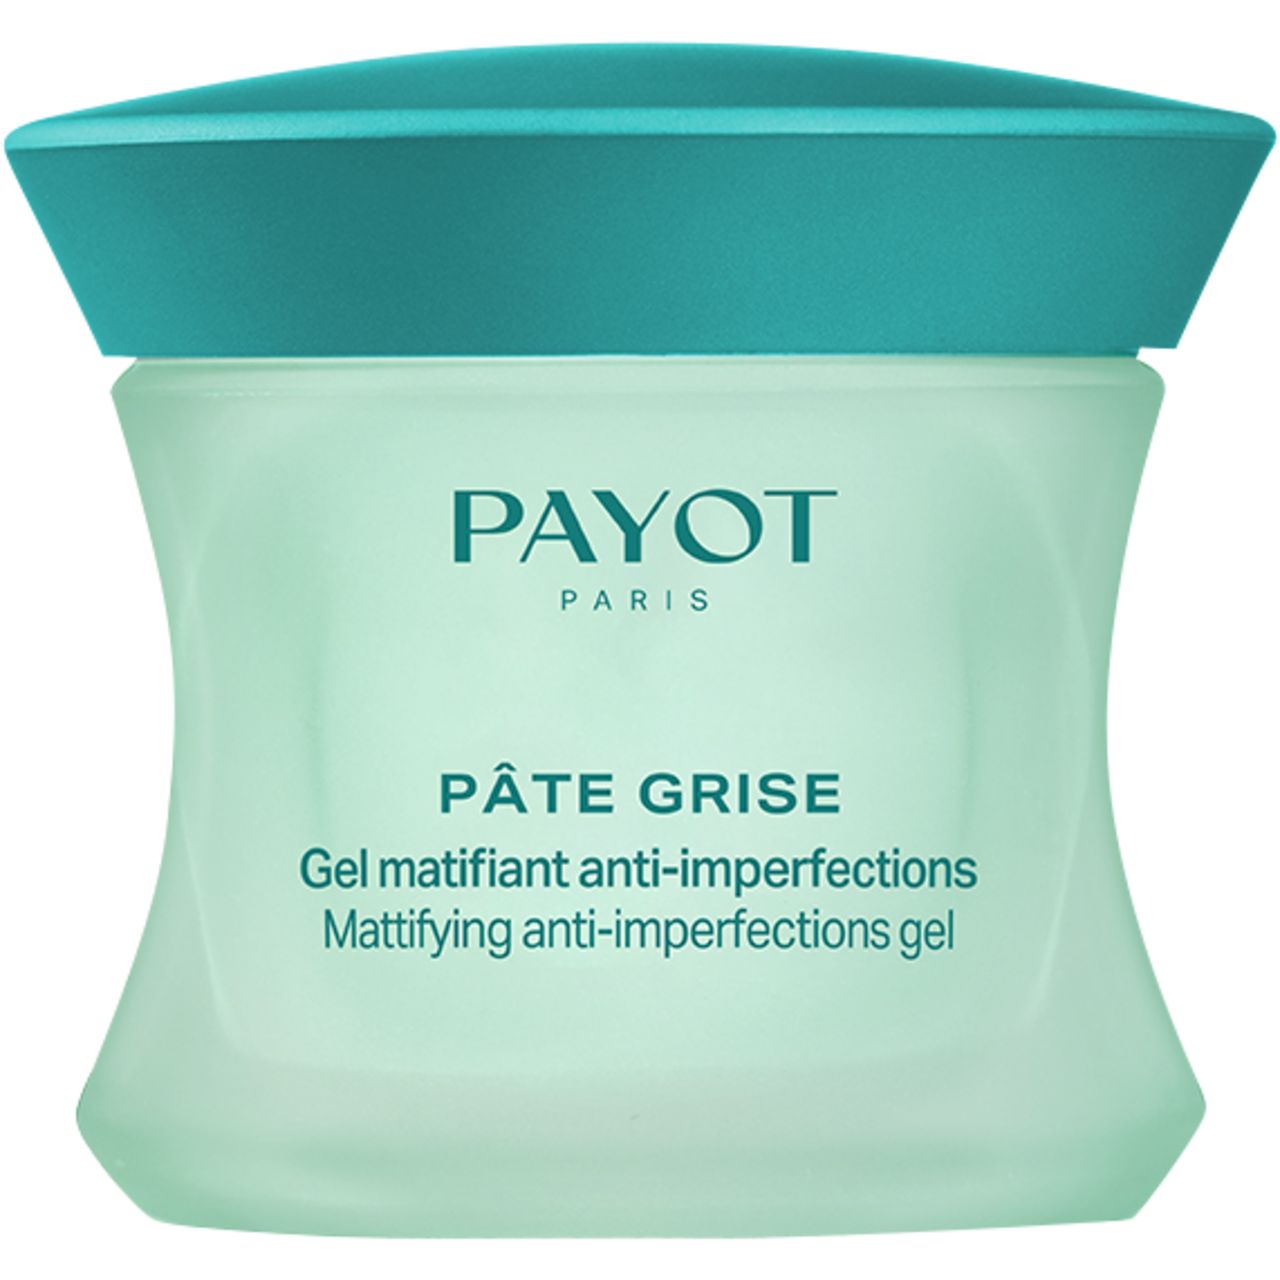 Payot, Pâte Grise Gel Matifiant Anti-Imperections